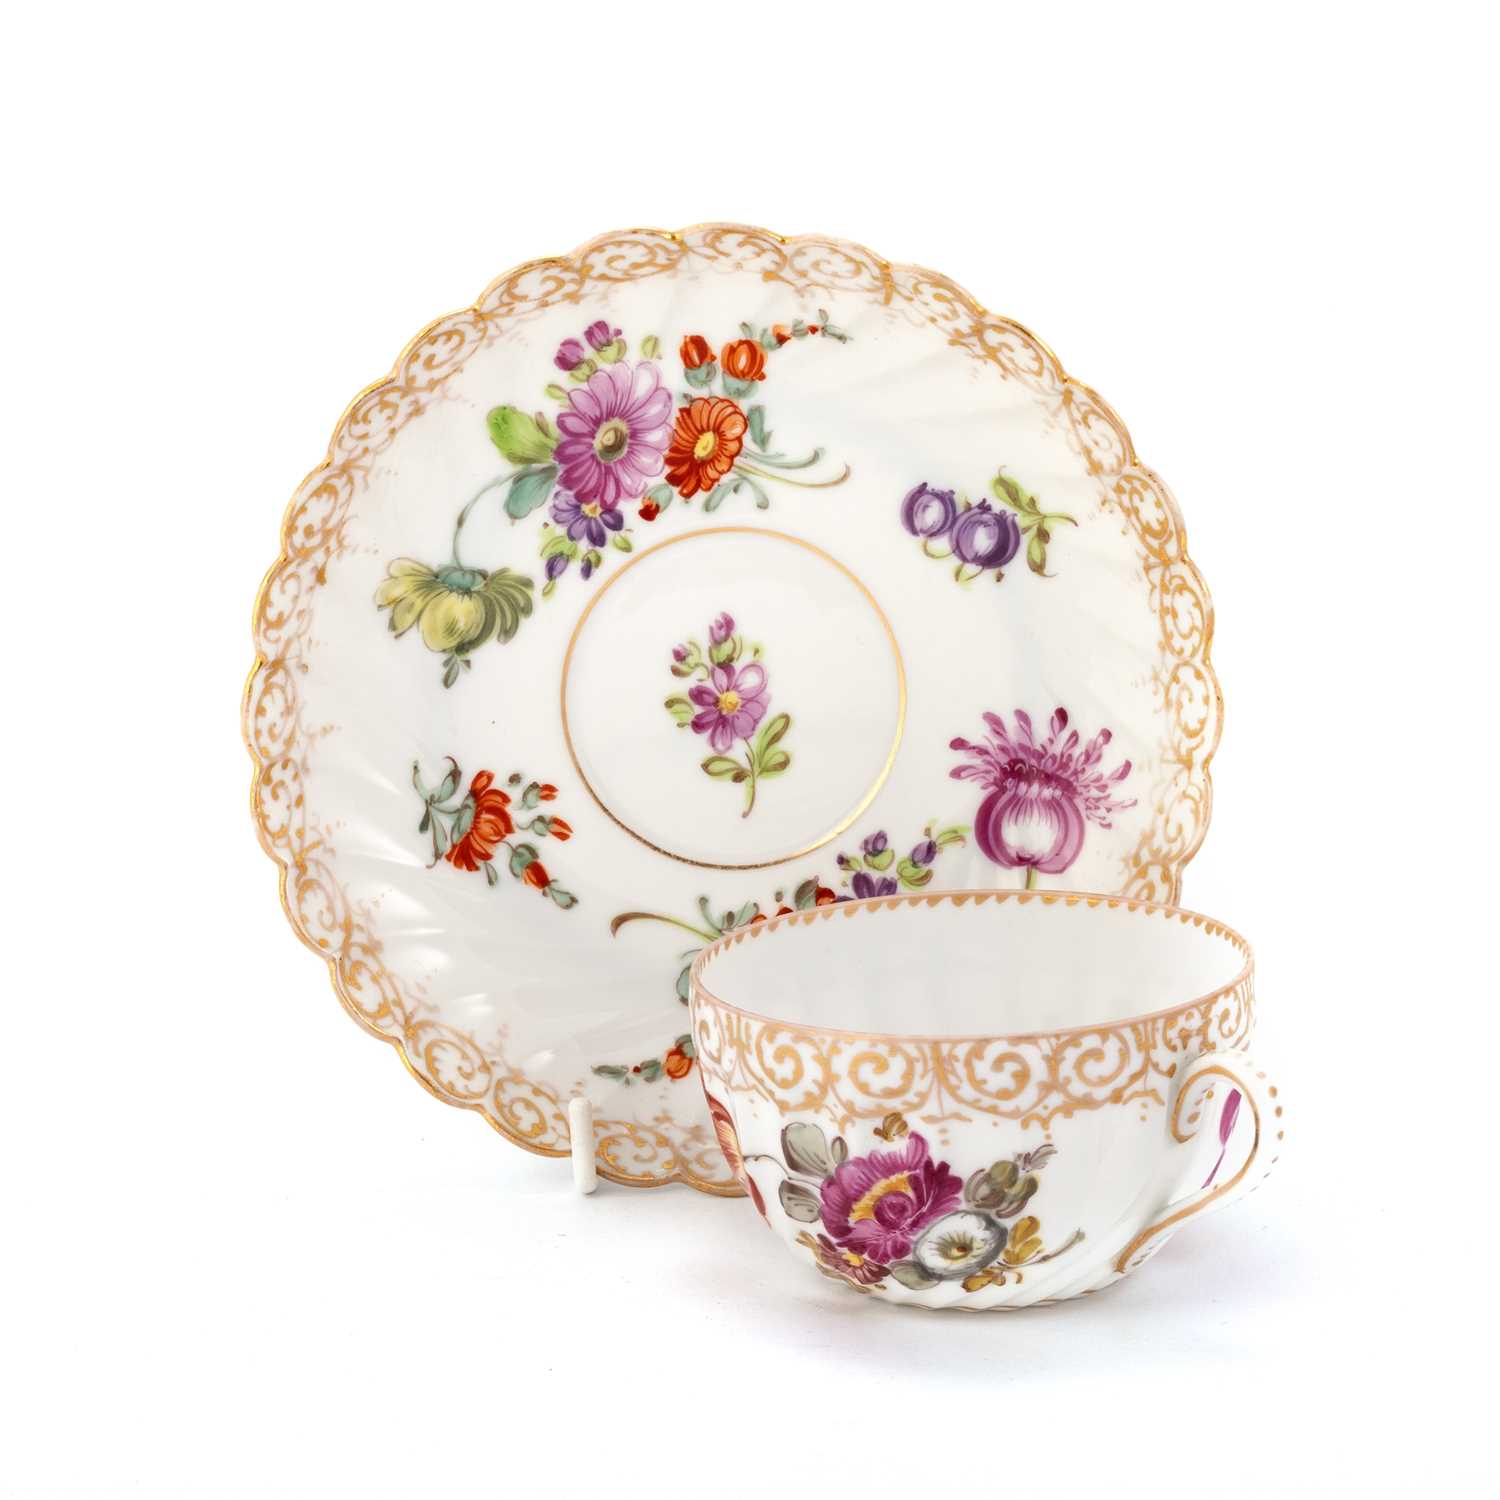 A ROYAL WORCESTER AESTHETIC CUP AND SAUCER, DATE CODES FOR 1876 AND 1877 - Image 3 of 3